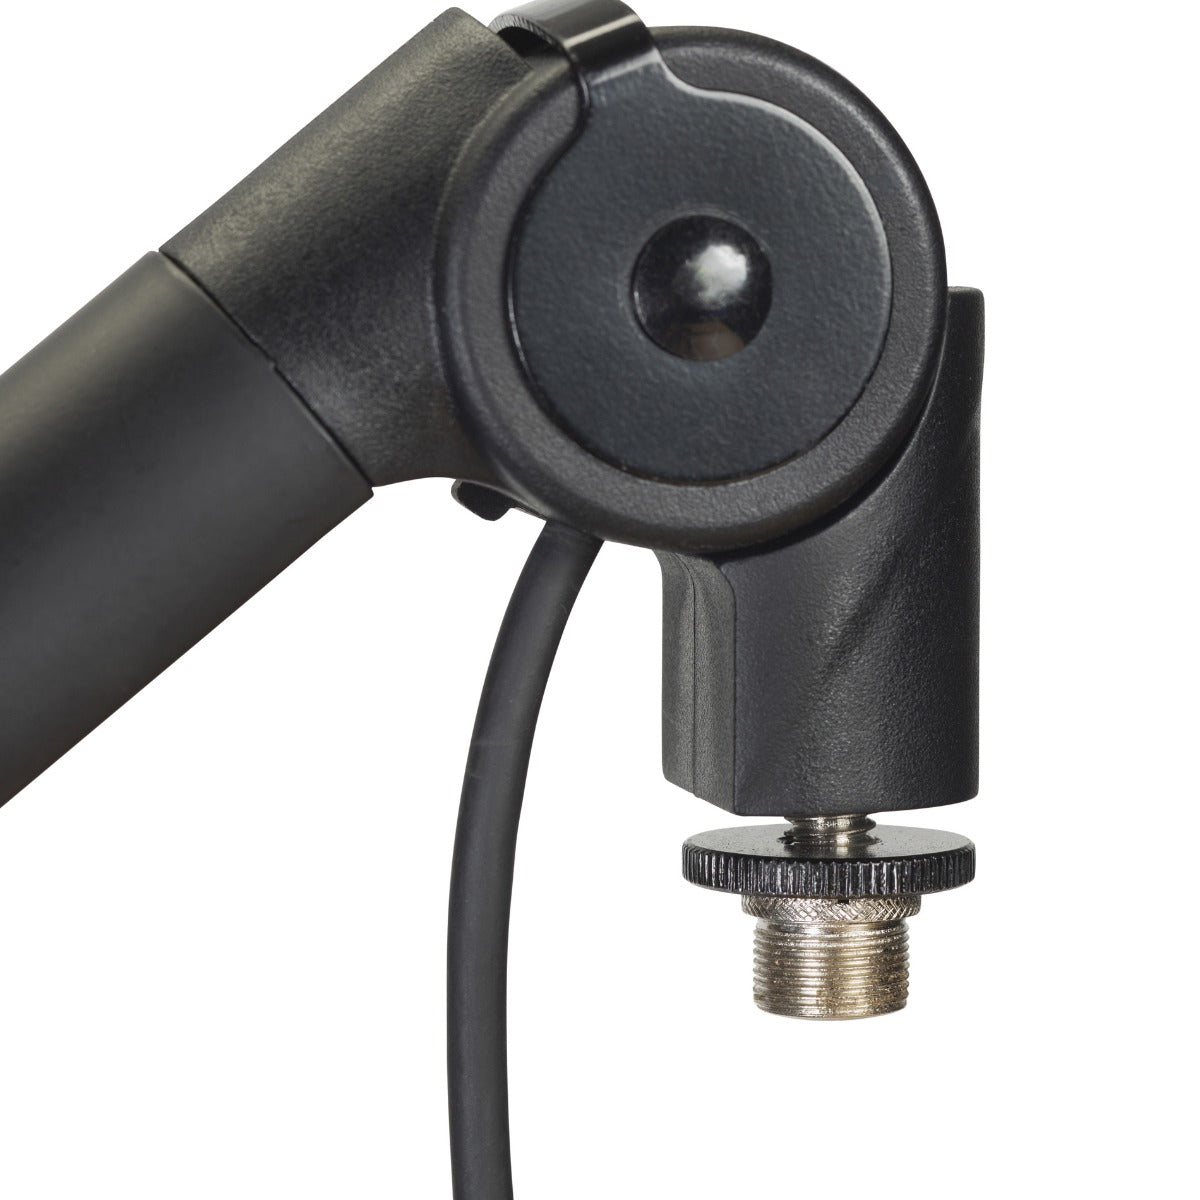 Closeup image of the other side of the hinge on the Gator Frameworks Deluxe Desktop Mic Boom Stand